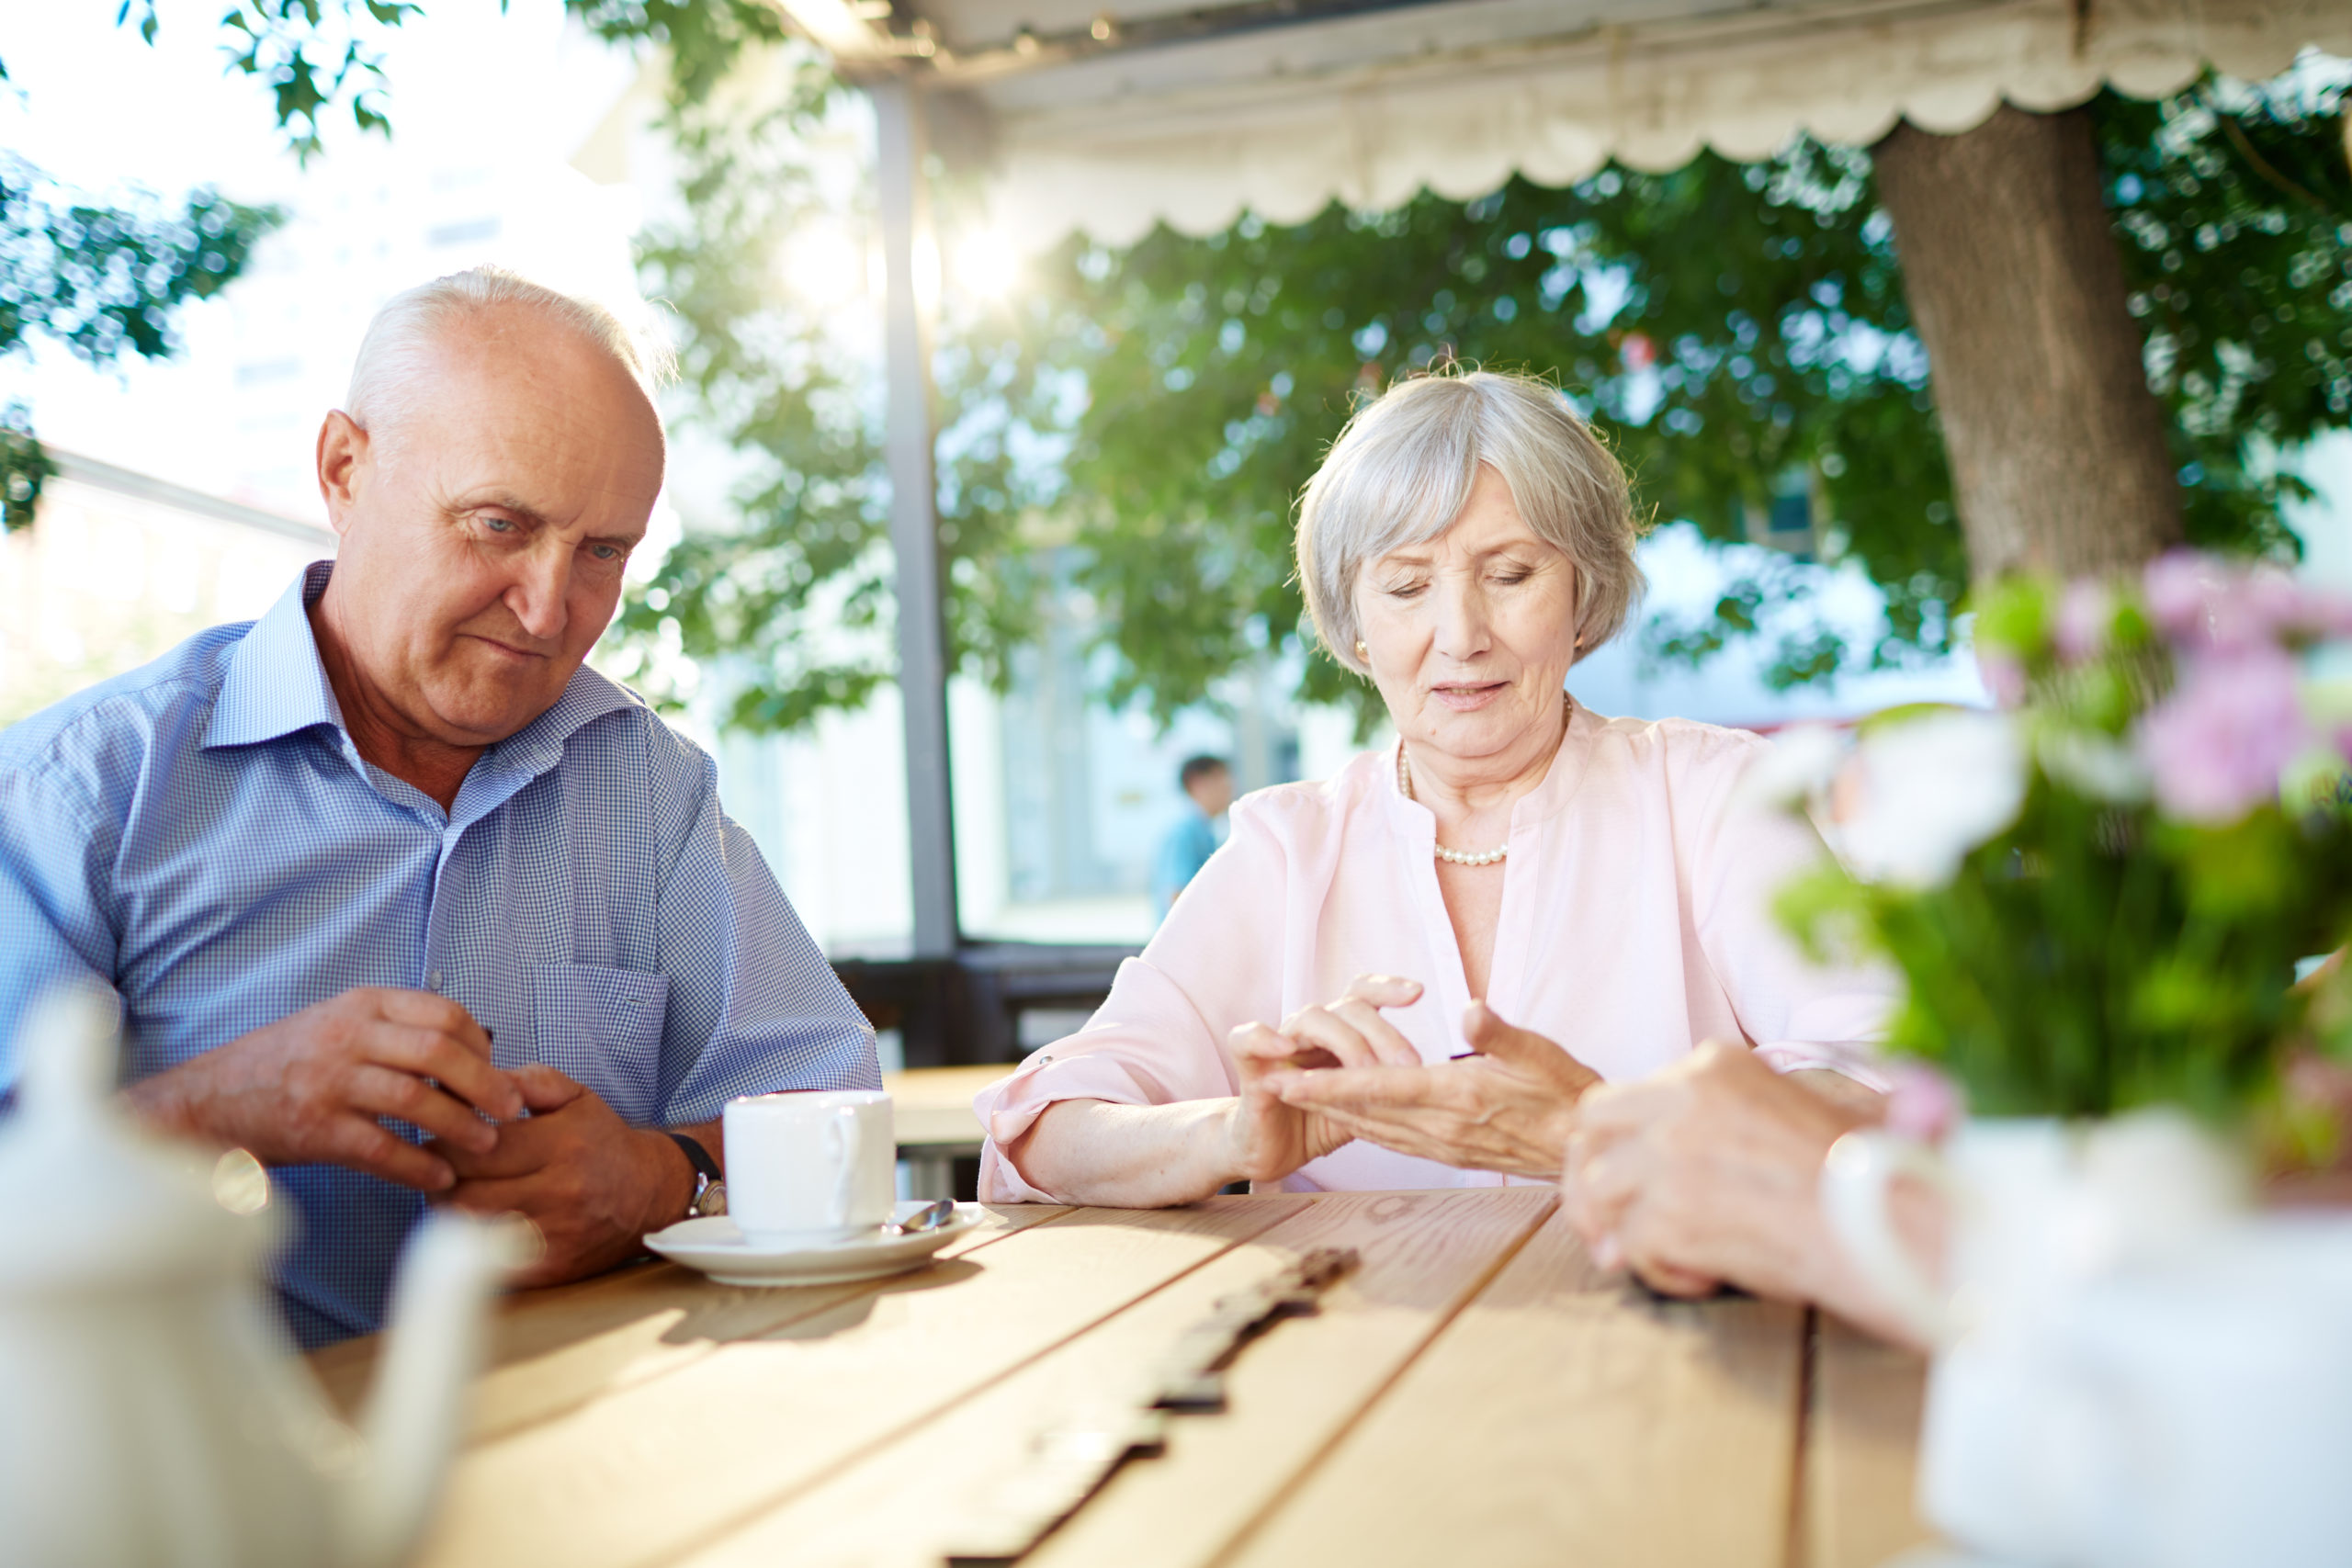 Waist-up portrait of male and female elderly people sitting at wooden table, drinking coffee and playing dominoes